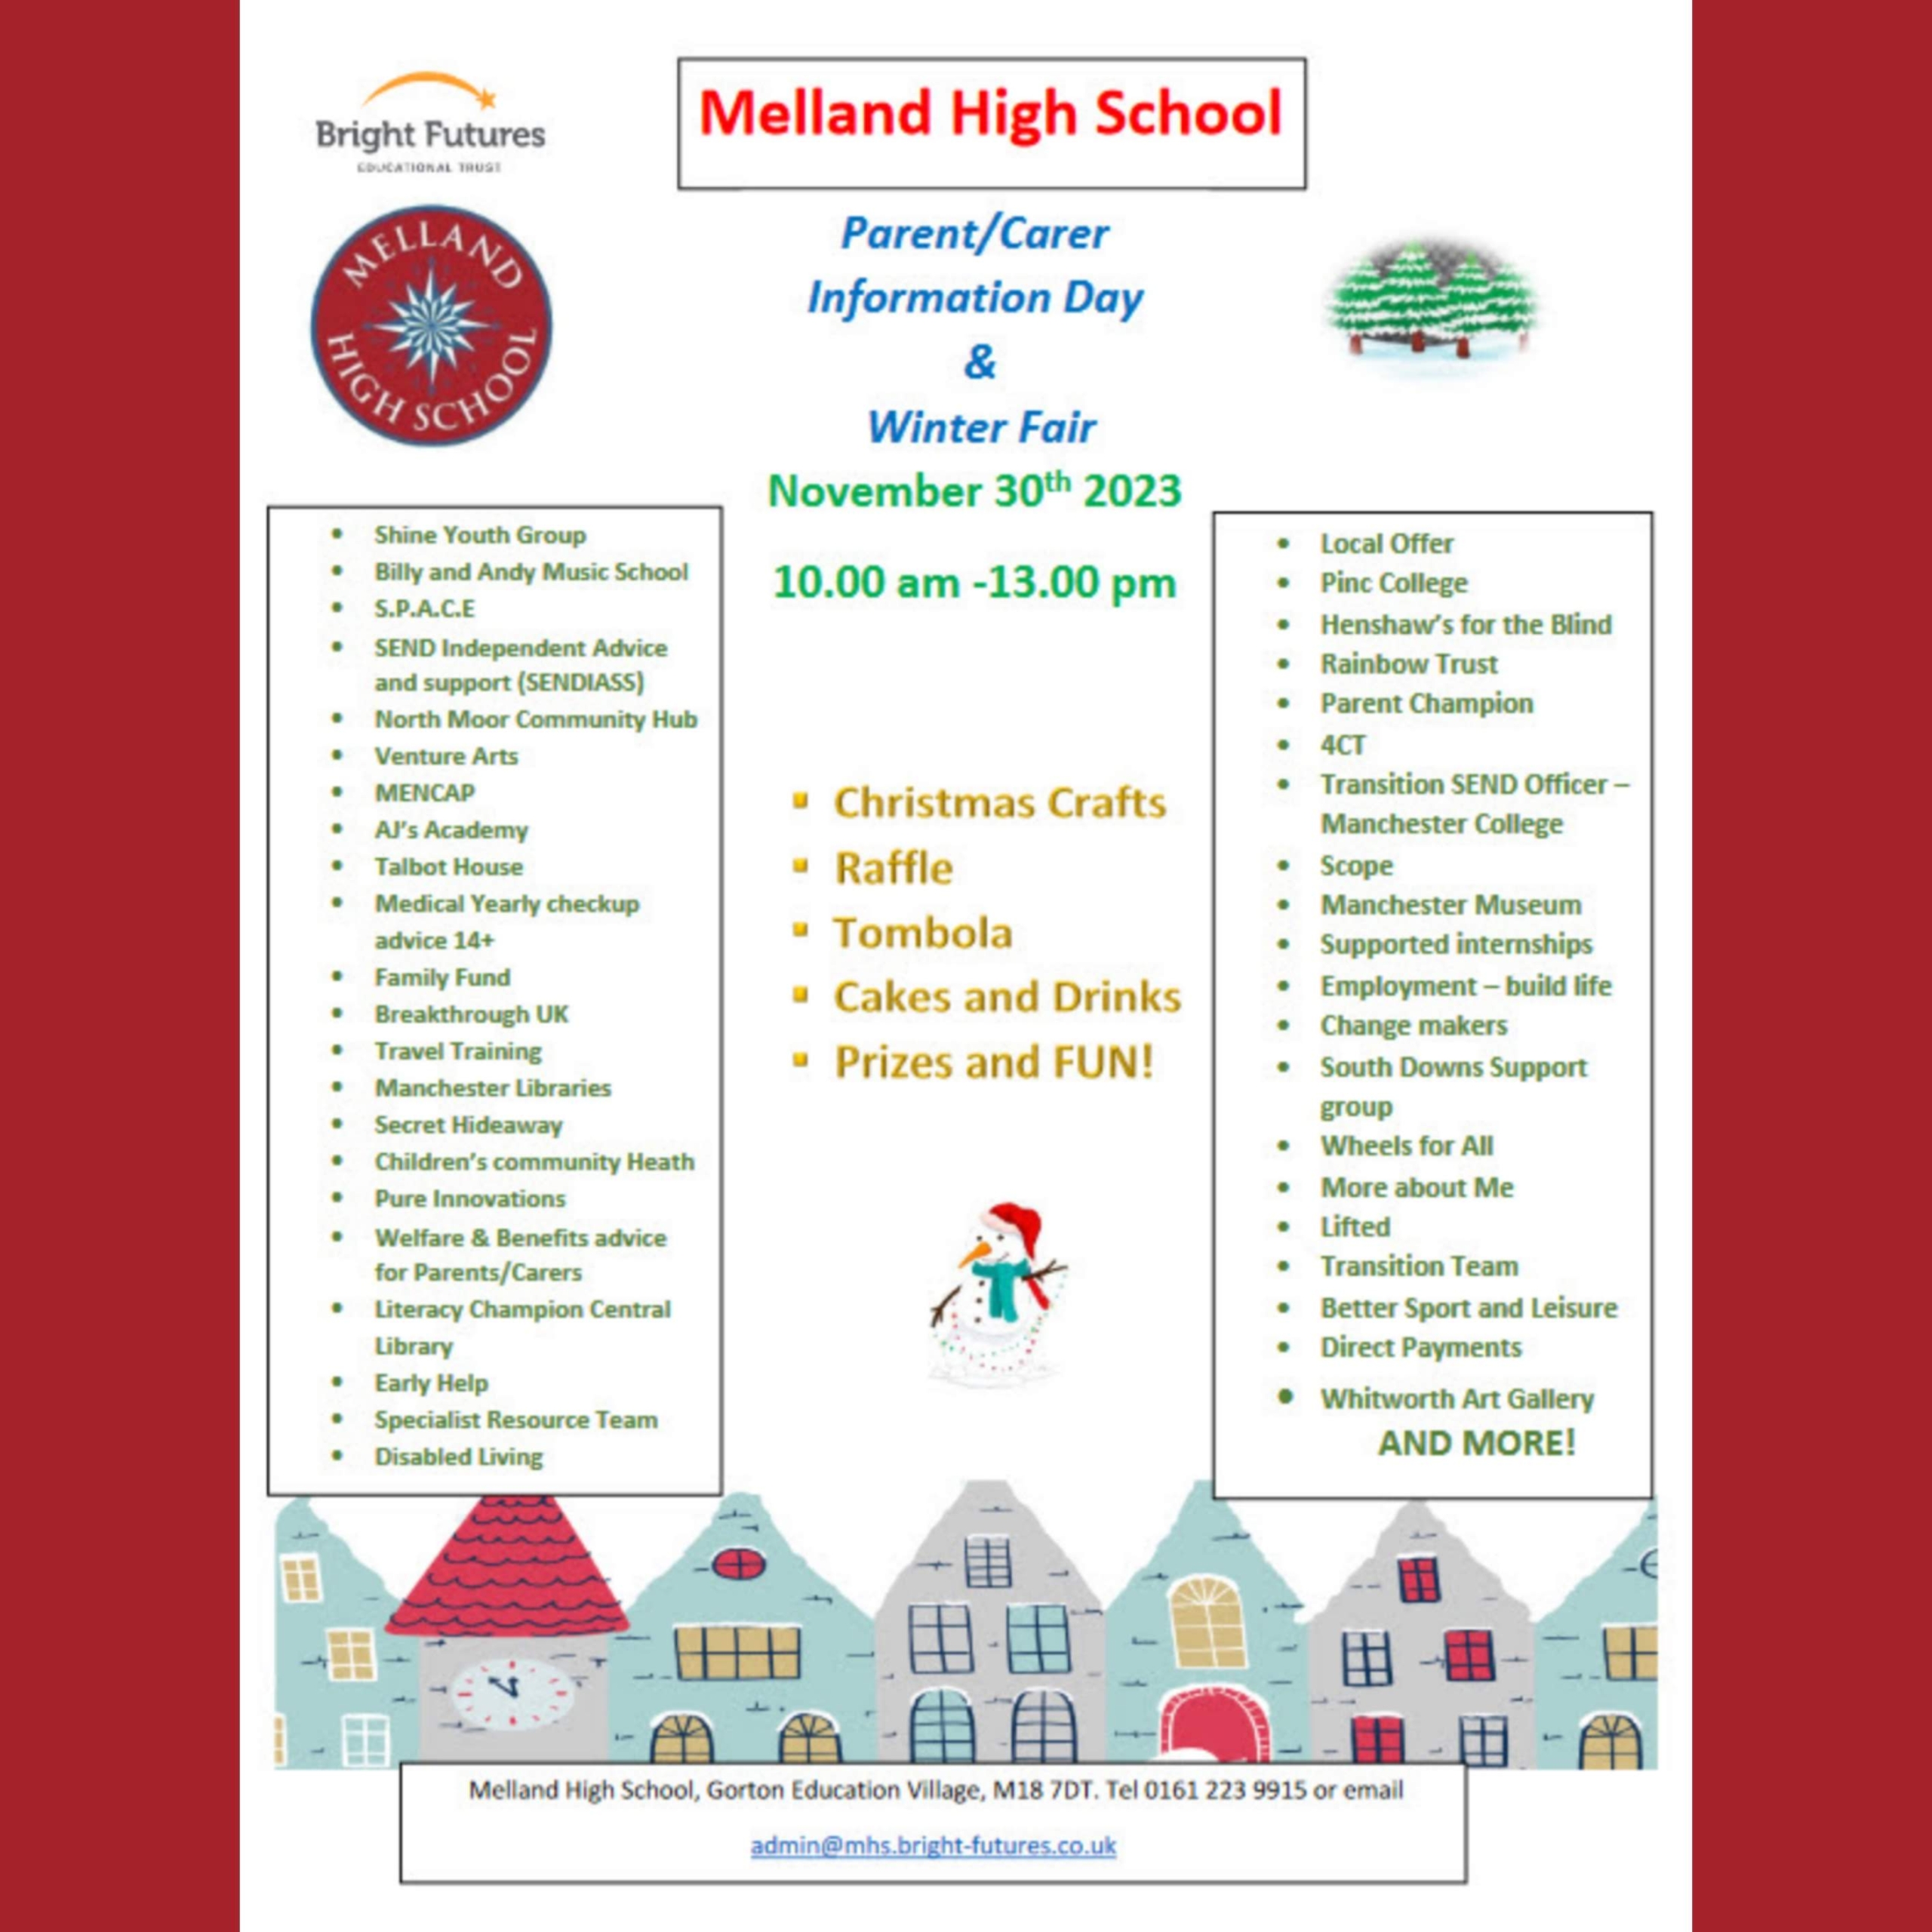 Poster for Melland High School's "Parents/Carer Information Day and Winter Fair" for 2023, showing festive-looking houses and Christmas trees in the background + Melland's and Bright Futures Educational Trust's logos at the top + event details in the foreground